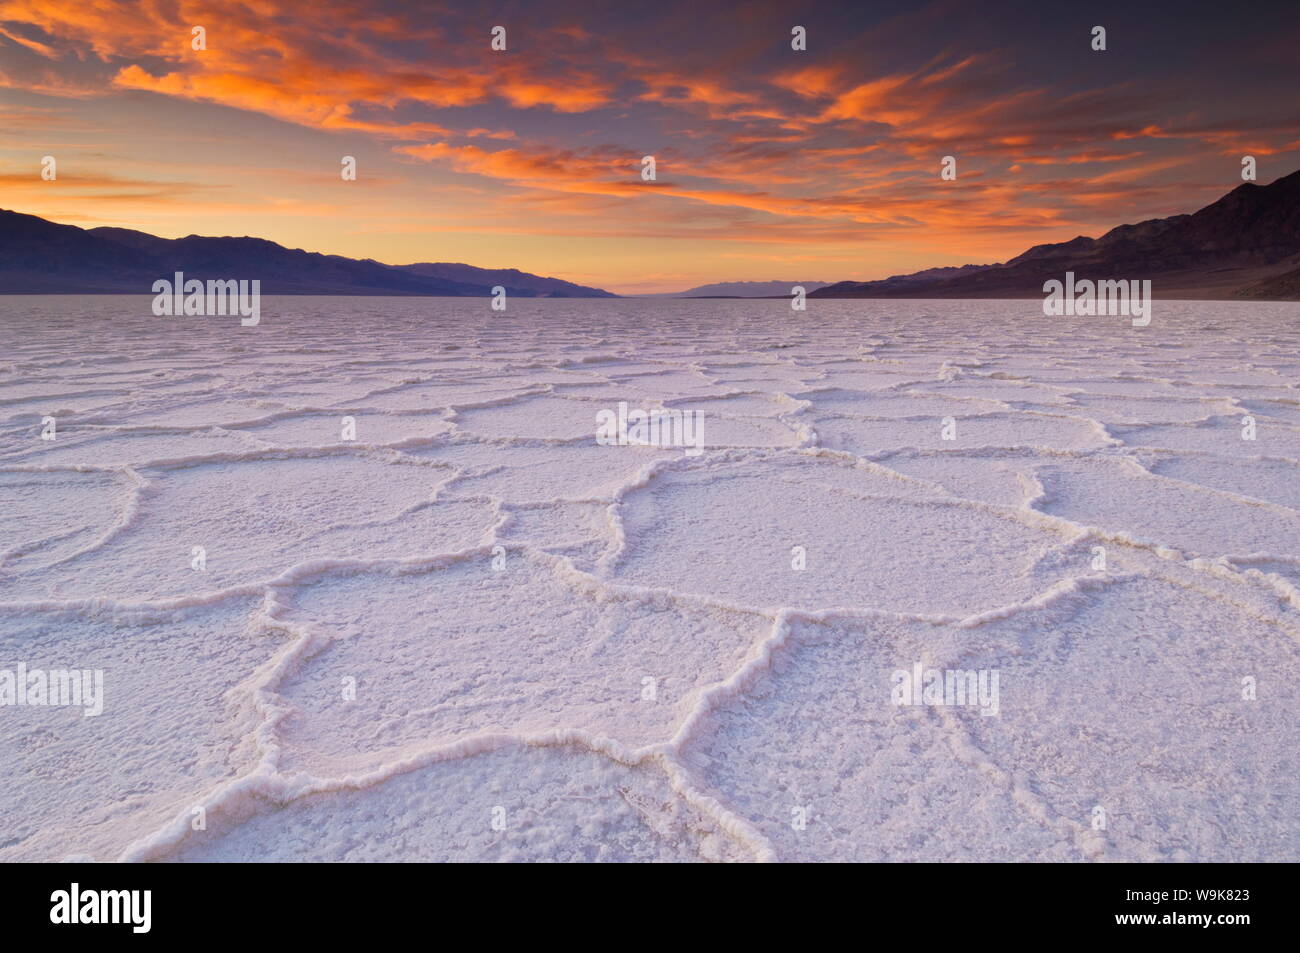 Sunset at the Salt pan polygons, Badwater Basin, the lowest place in North America, Death Valley National Park, California, USA Stock Photo